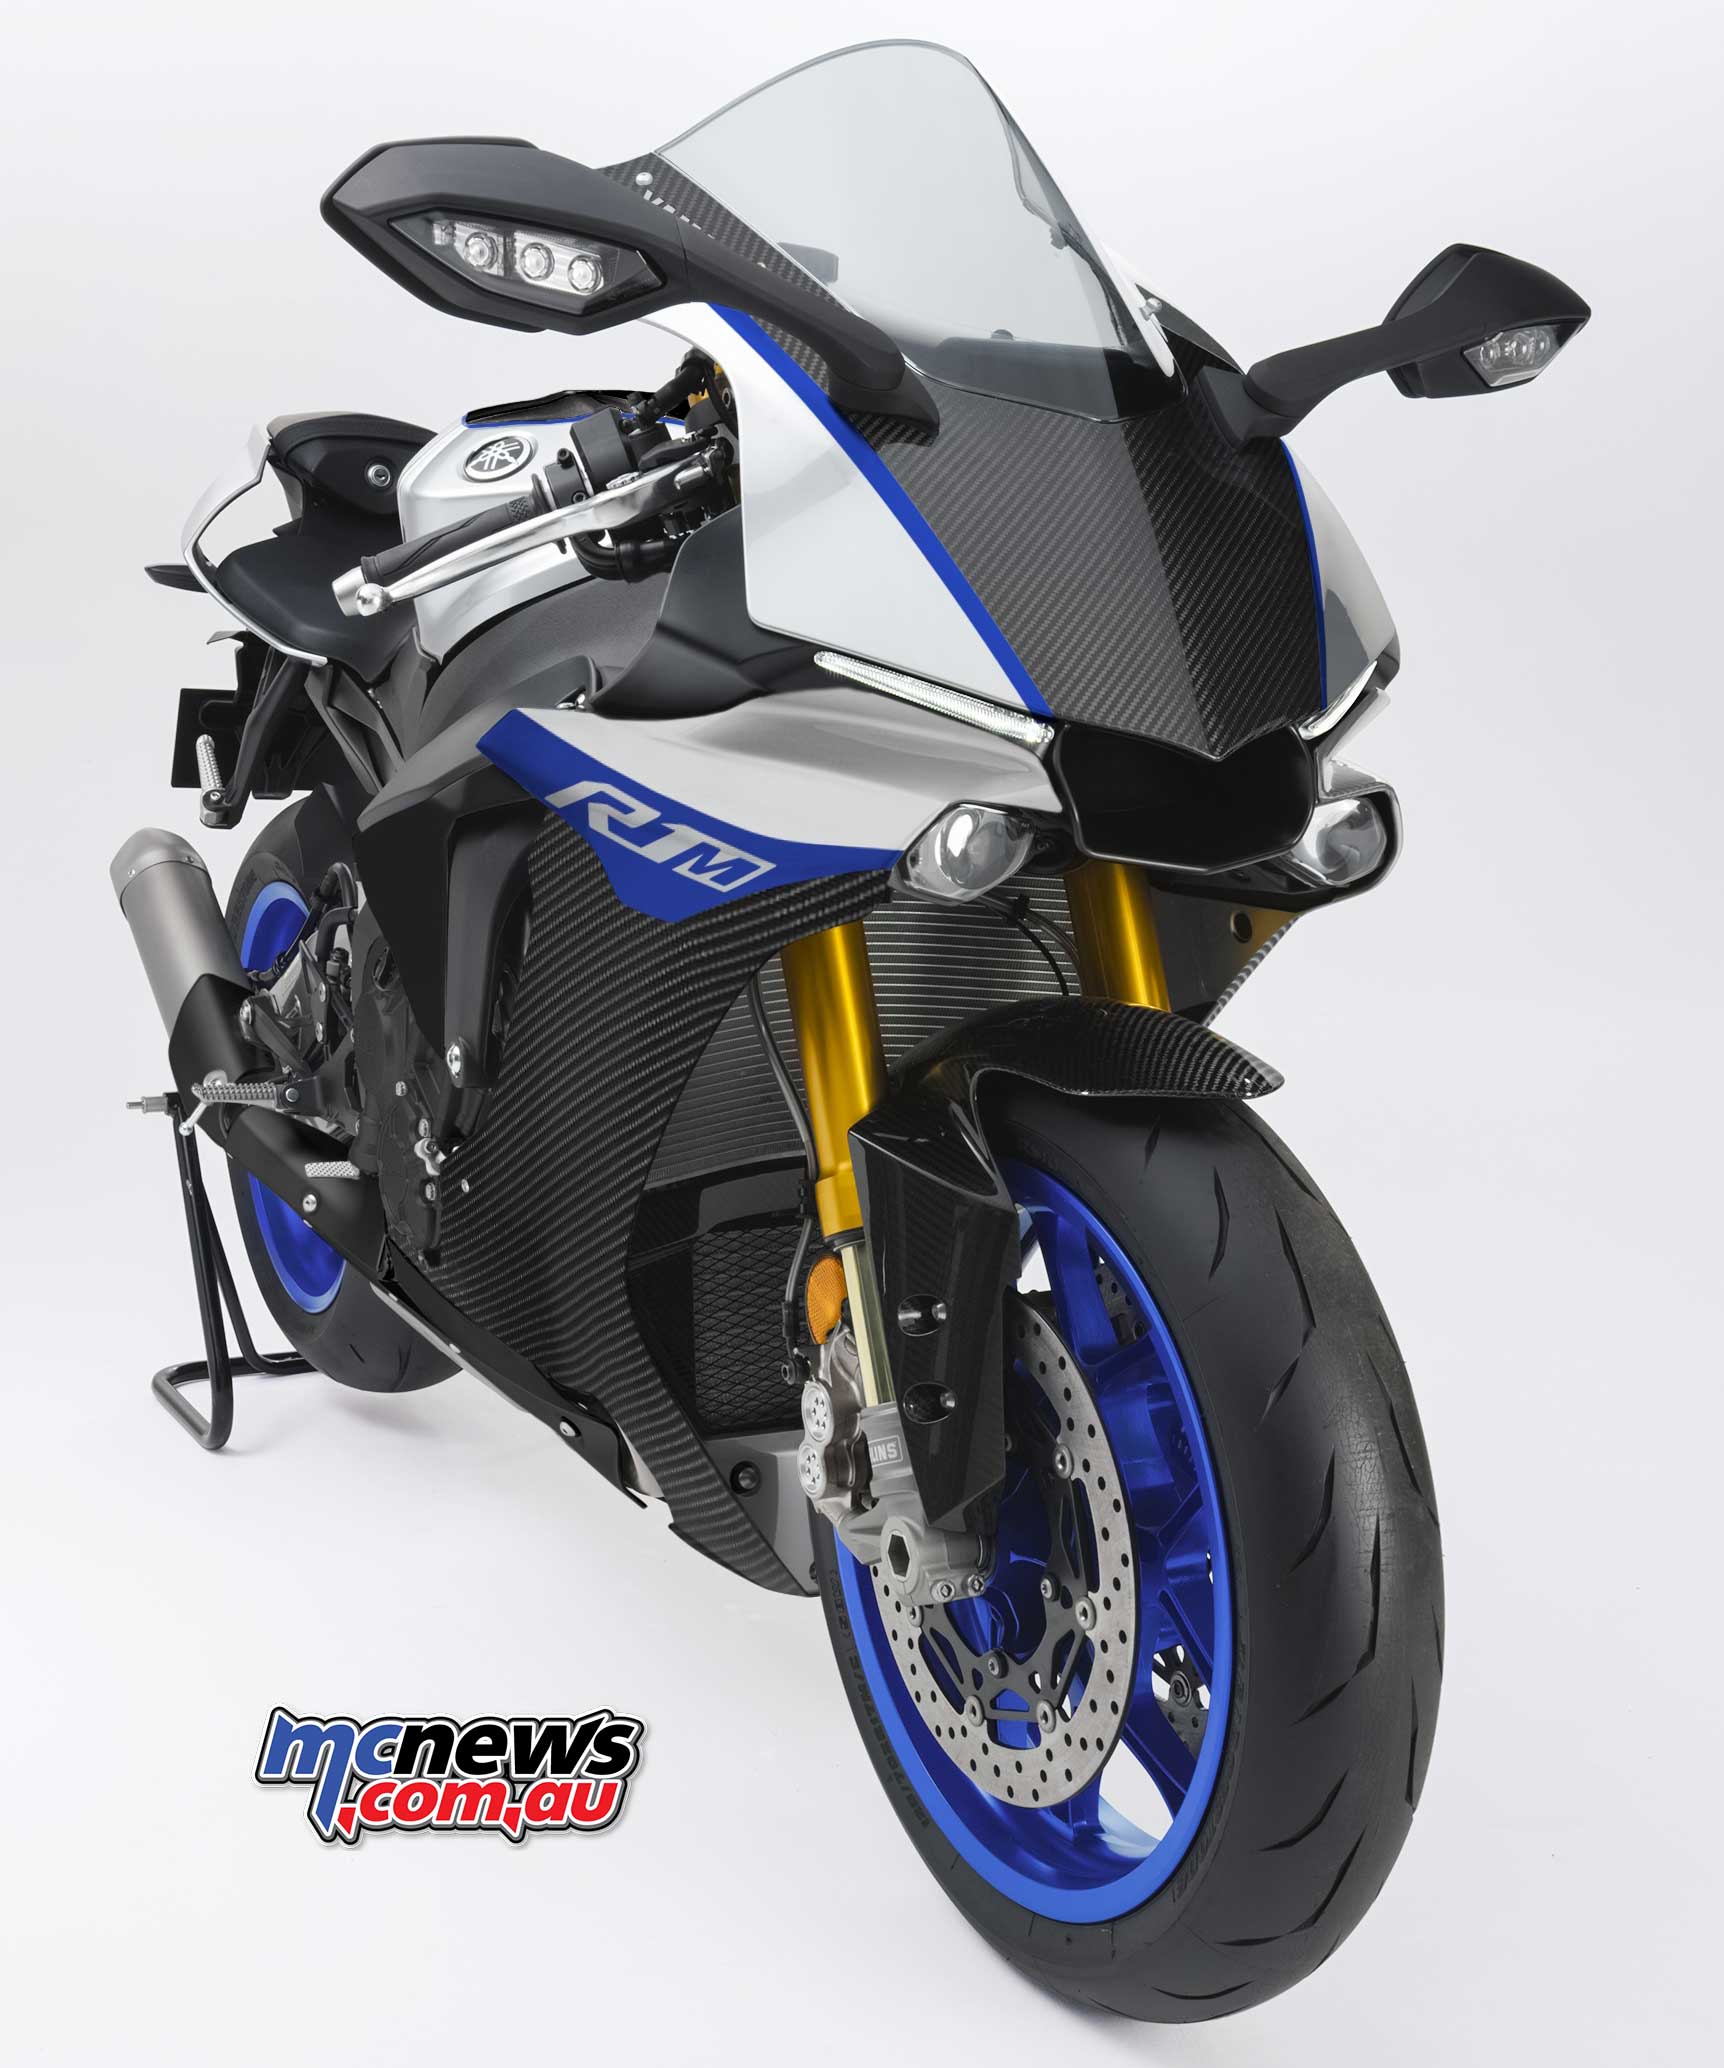 2018 Yamaha Yzf R1m New Suspension Tech Motorcycle News Sport And Reviews